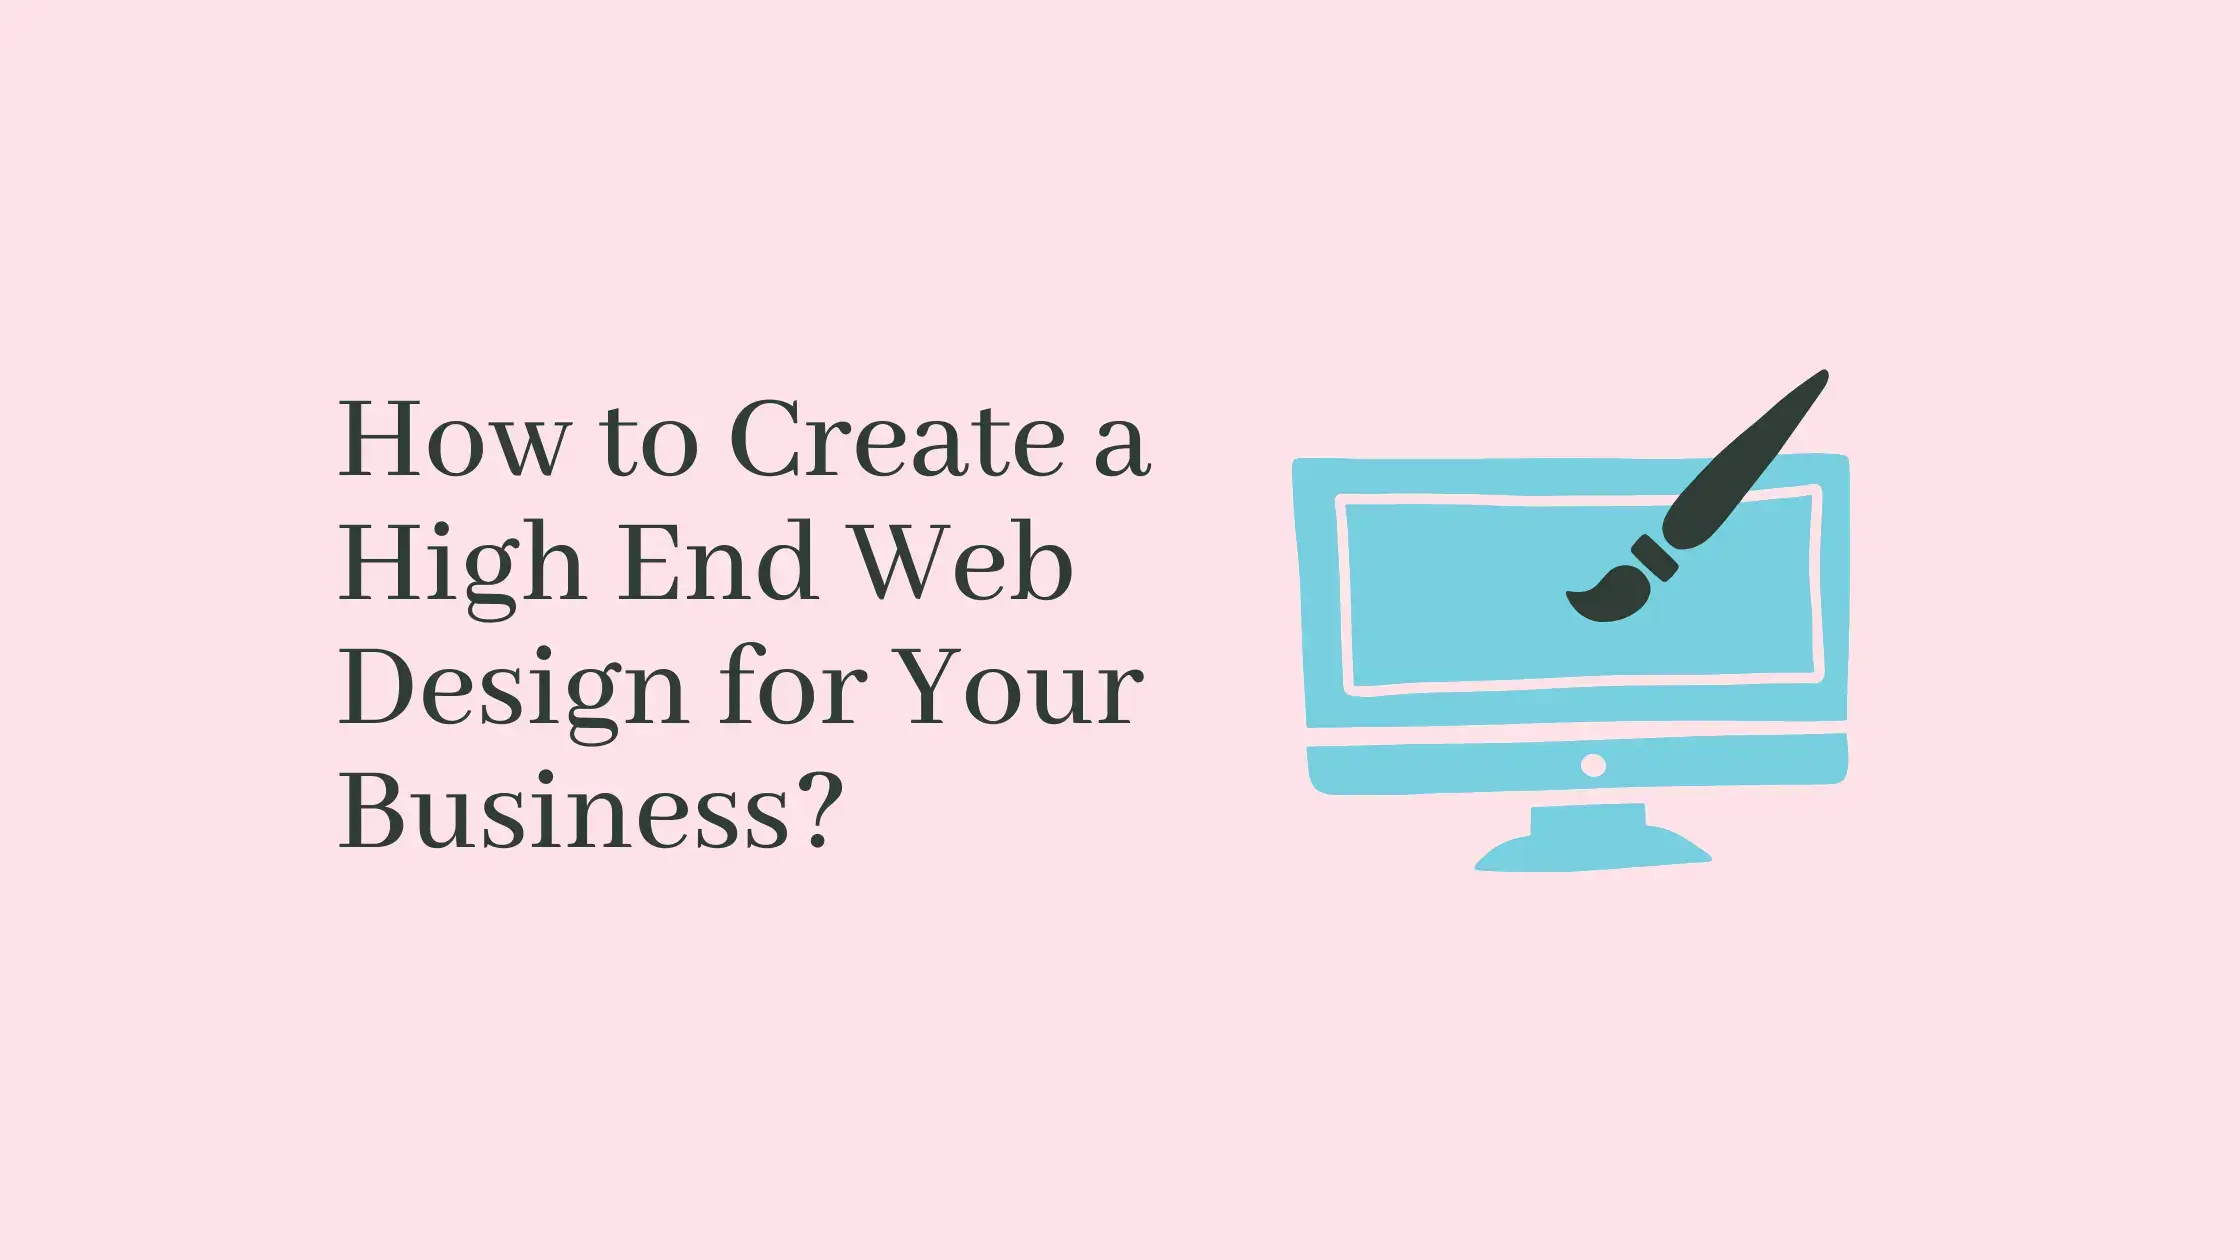 How to Create a High End Web Design for Your Business